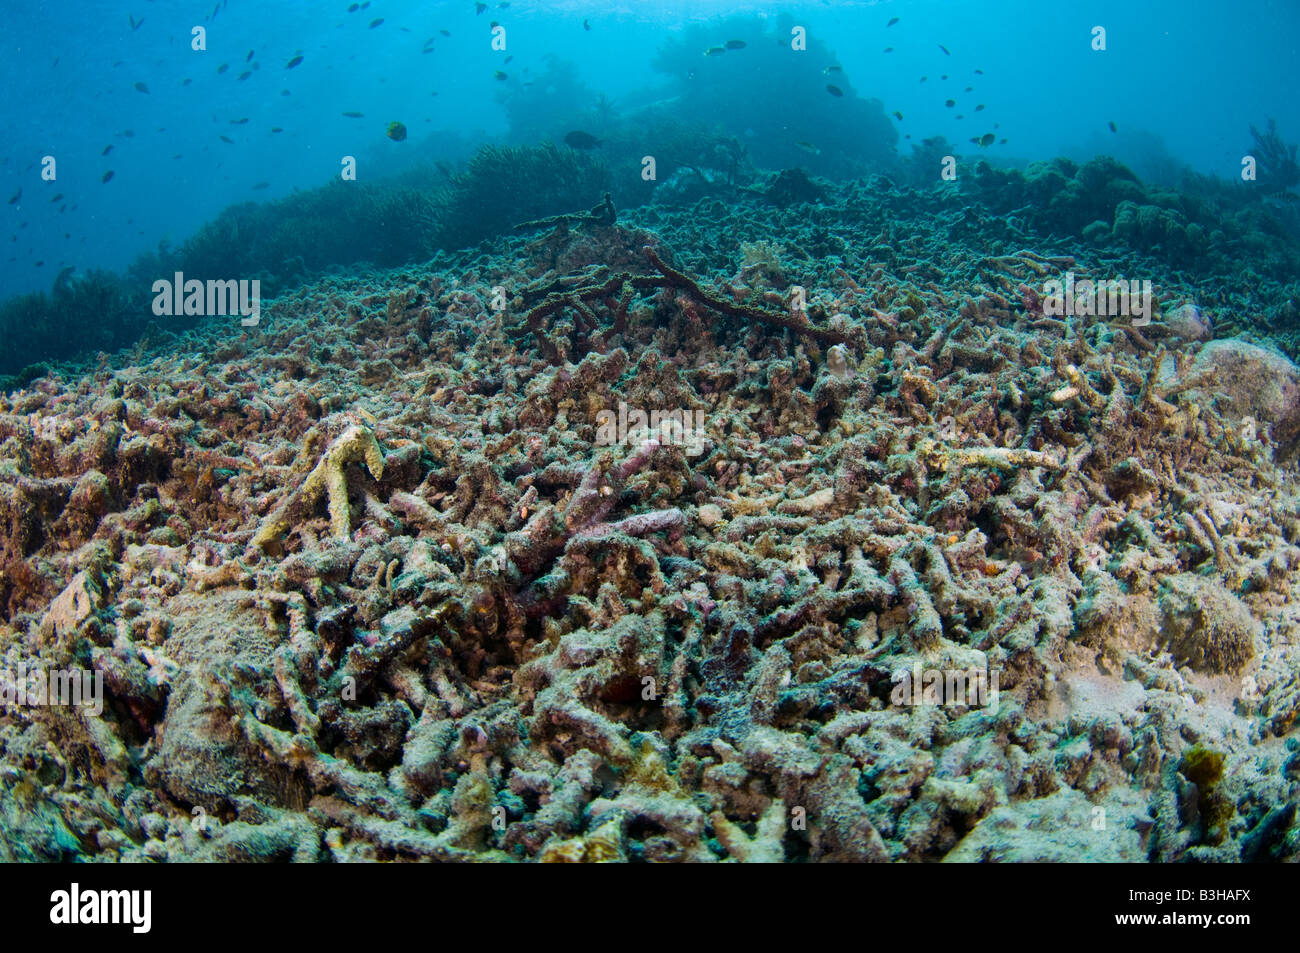 Coral reef in Komodo National Park Indonesia destroyed by ...